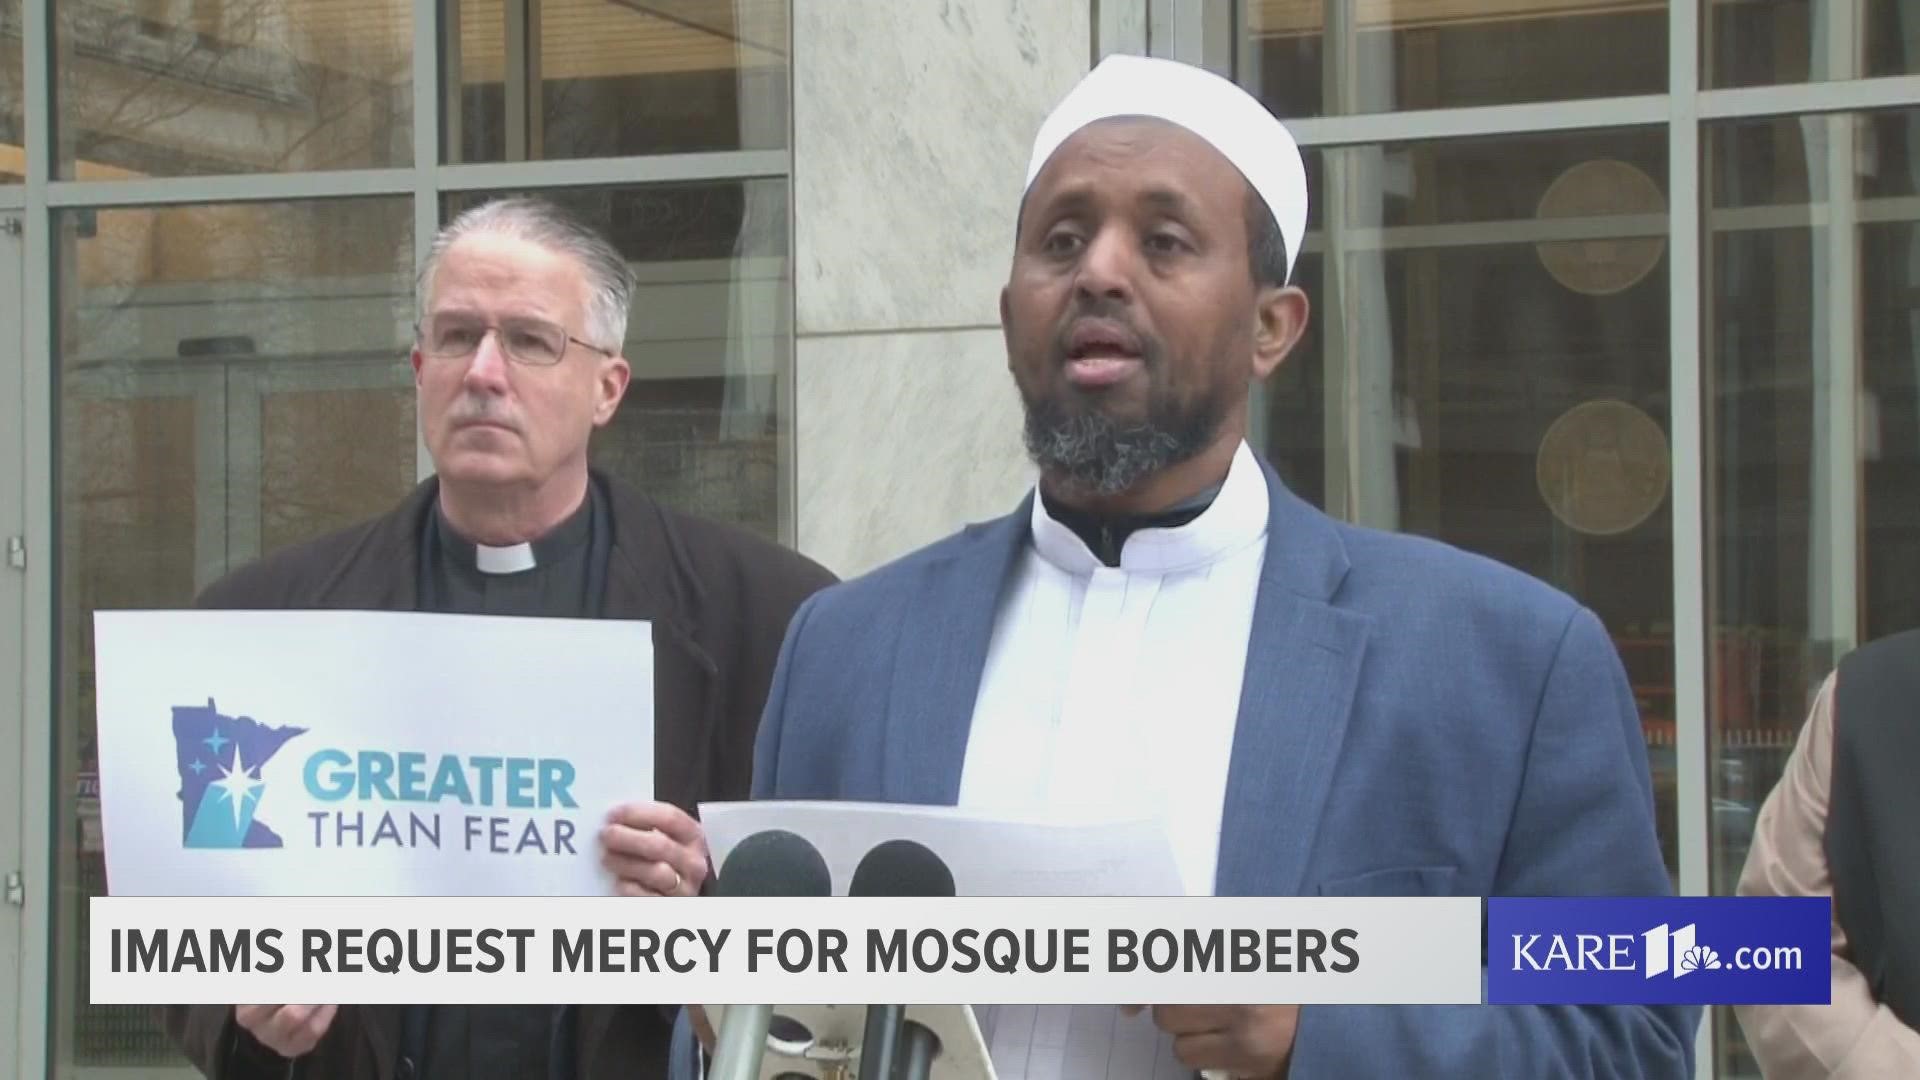 A coalition of faith leaders, including Imams from the Dar al-Farooq Islamic Center, are asking for leniency when two men are sentenced in the 2017 mosque bombing.